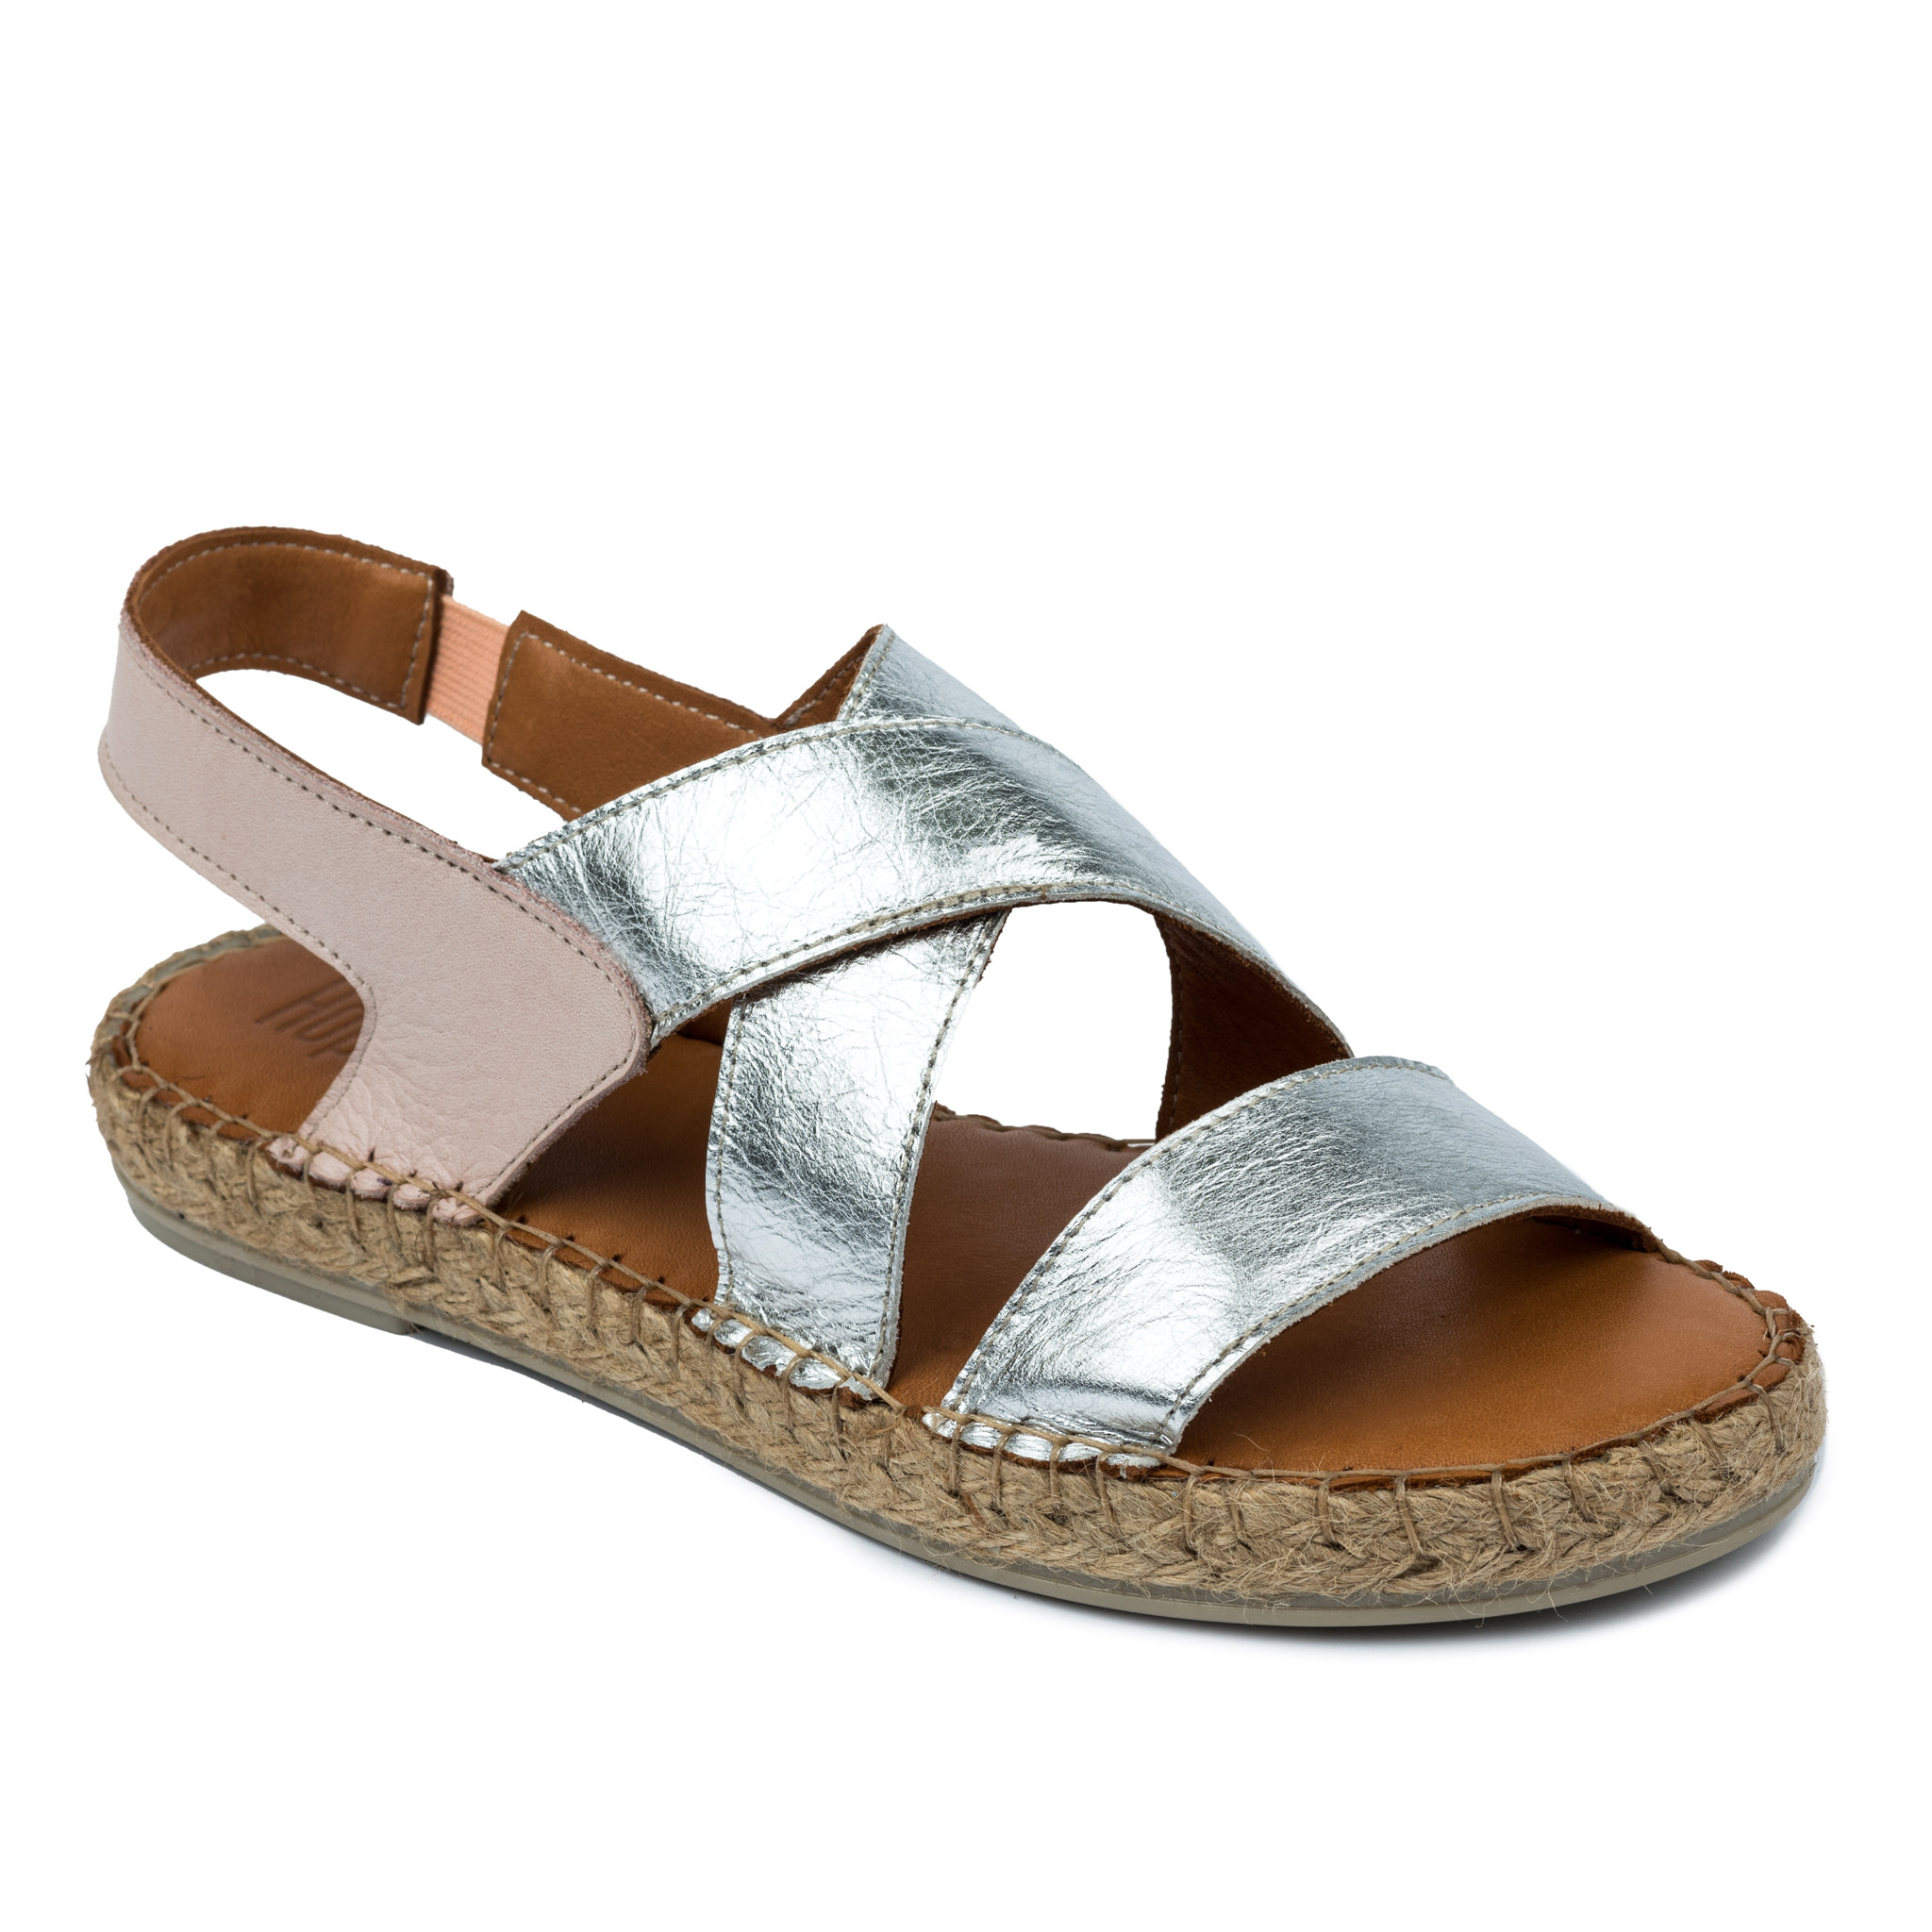 Leather espadrilles A586 - SILVER